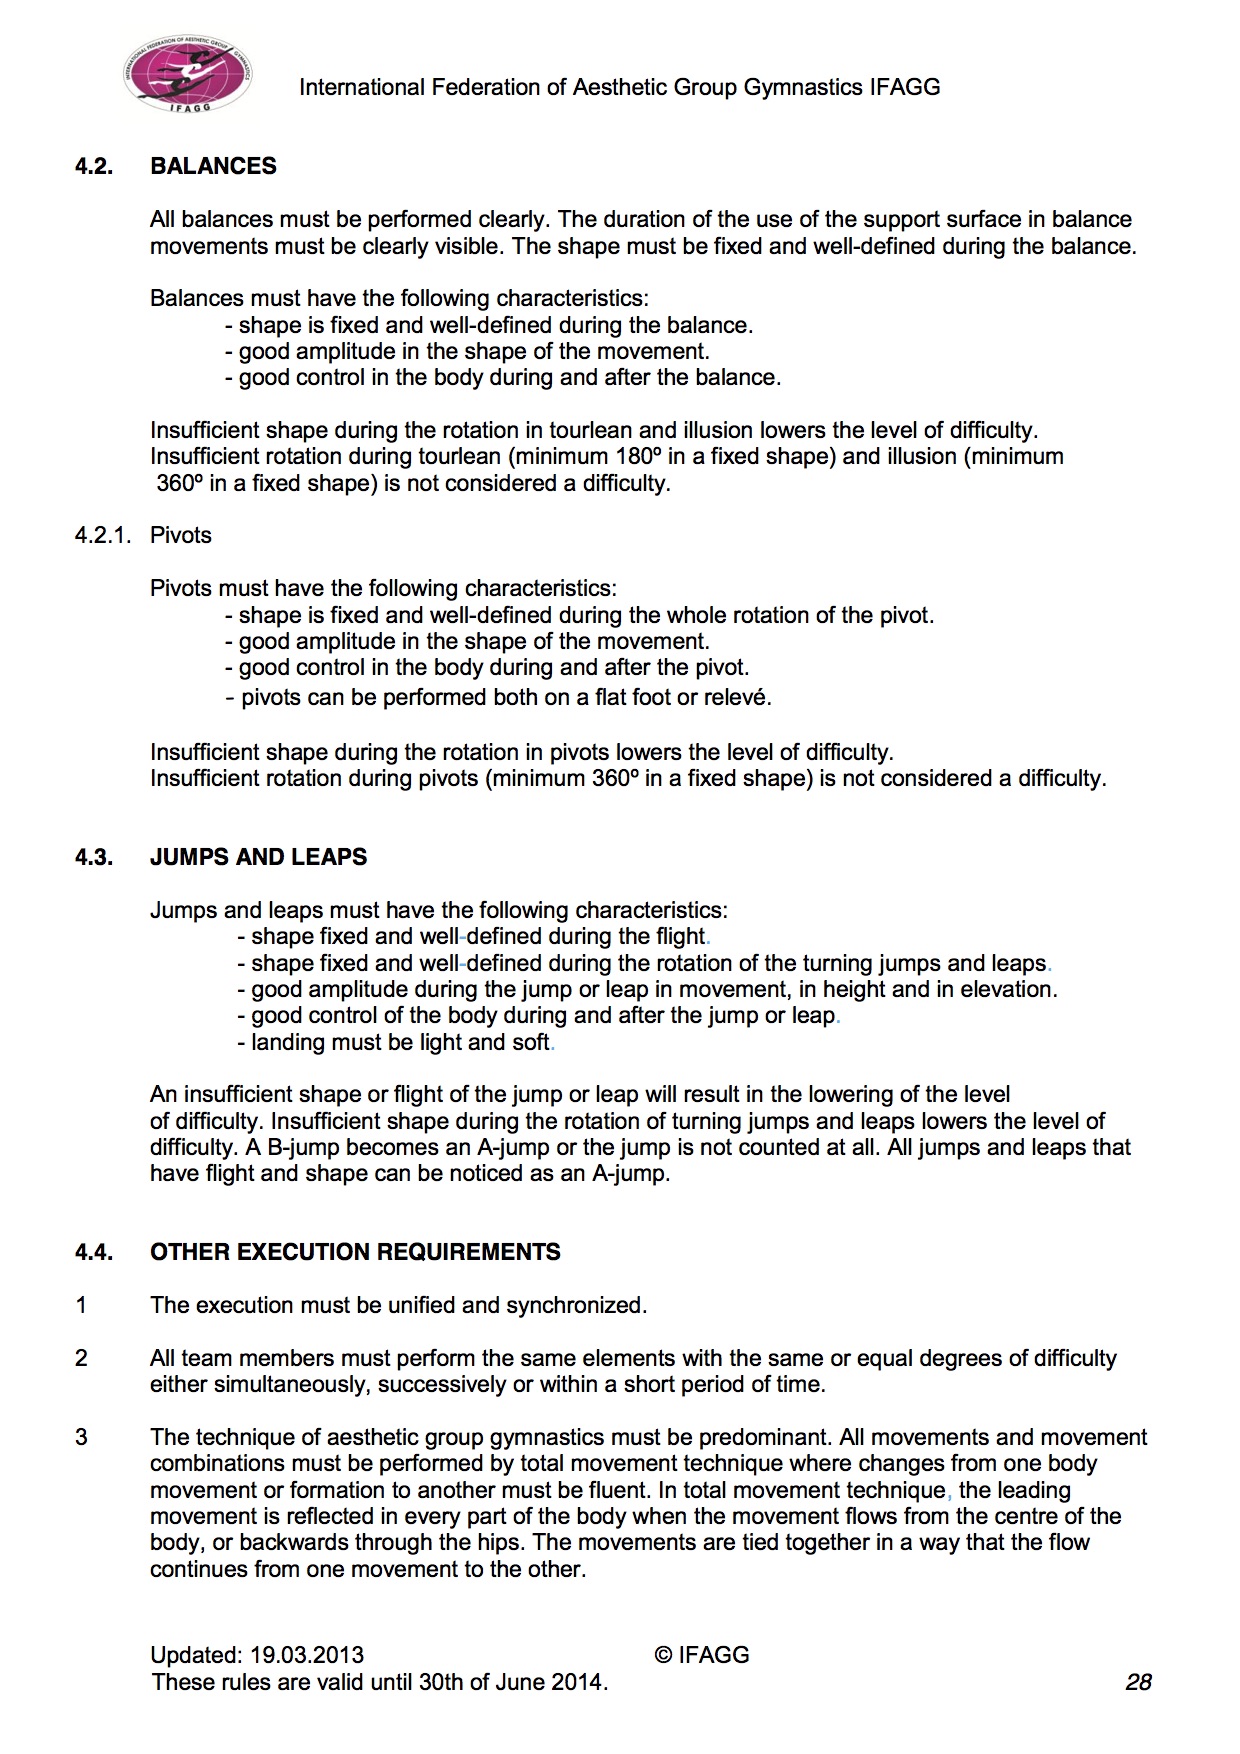 IFAGG Competition rules28.jpg